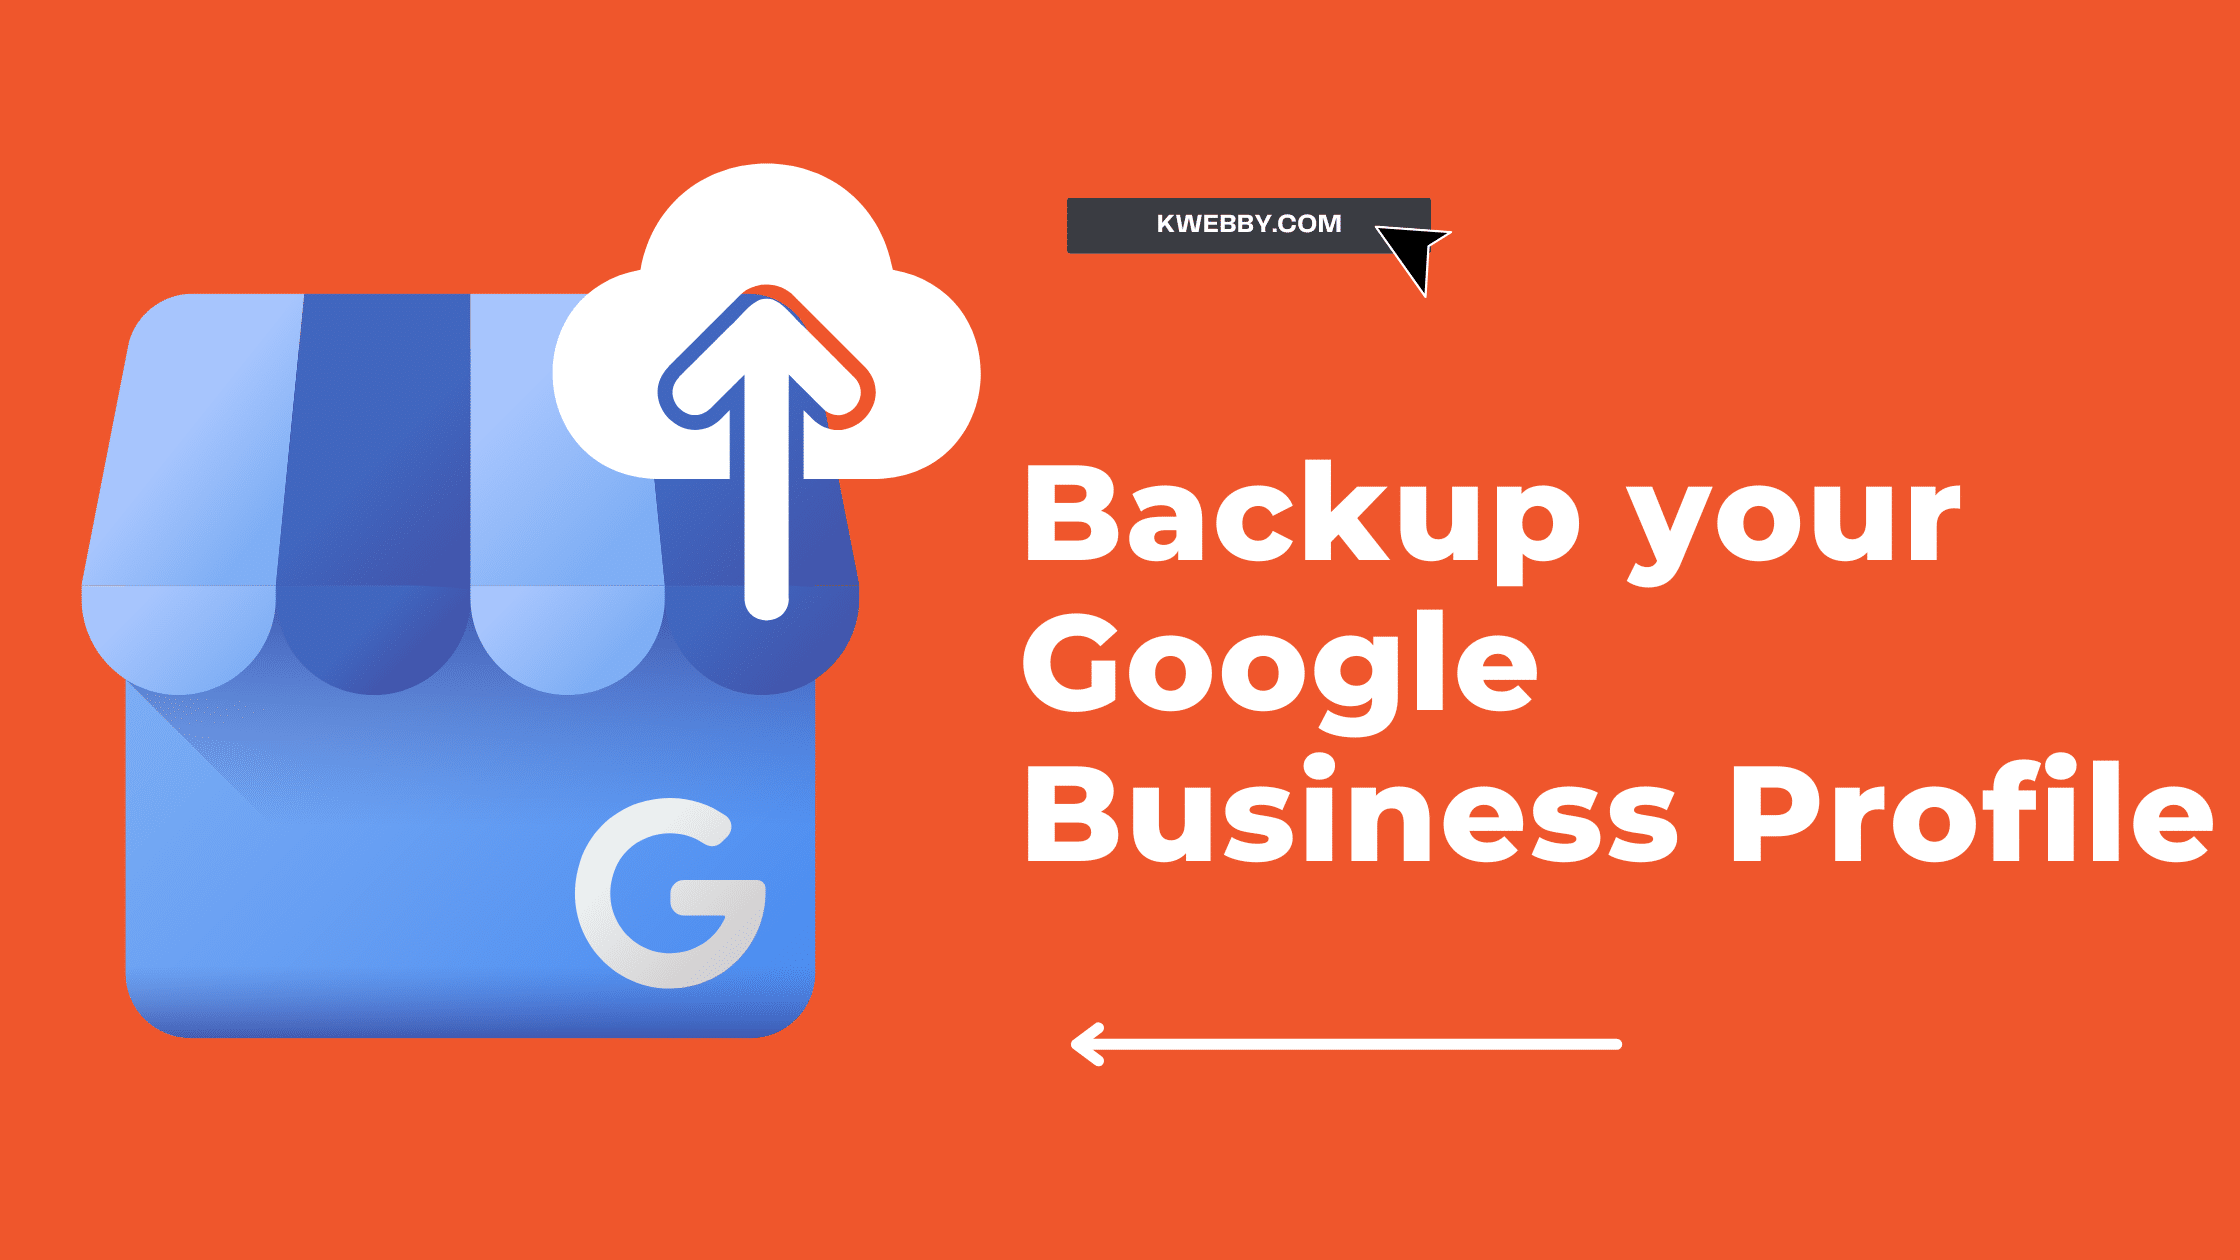 How to backup your Google Business Profile in 2 Simple Steps